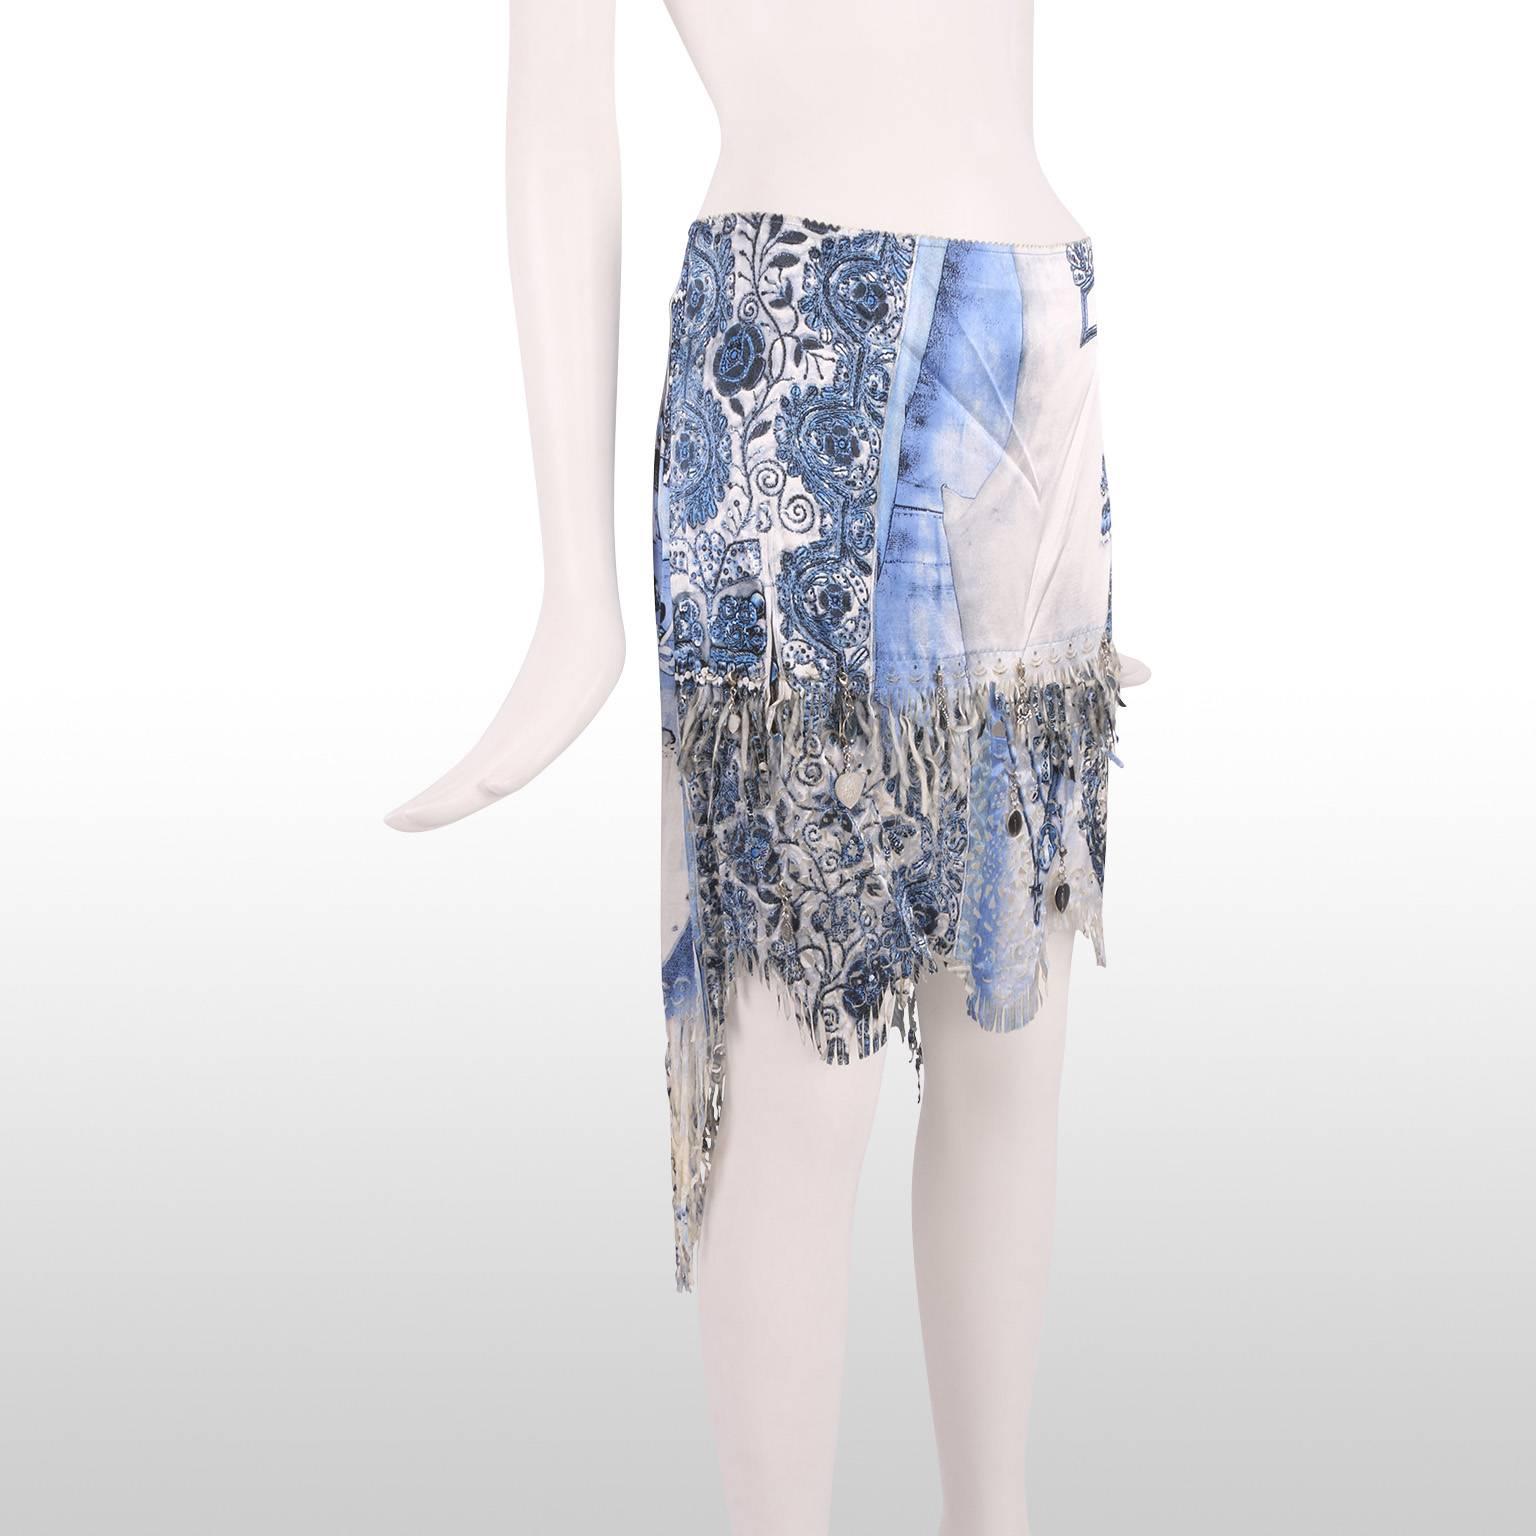 Ethereal light weight skirt from Jean Paul Gaultier. The skirt features a beautiful multi toned blue china pattern with gypsy style shredded hem. Small metallic charms also feature around the hem of the skirt giving it a real beachy and boho feel.